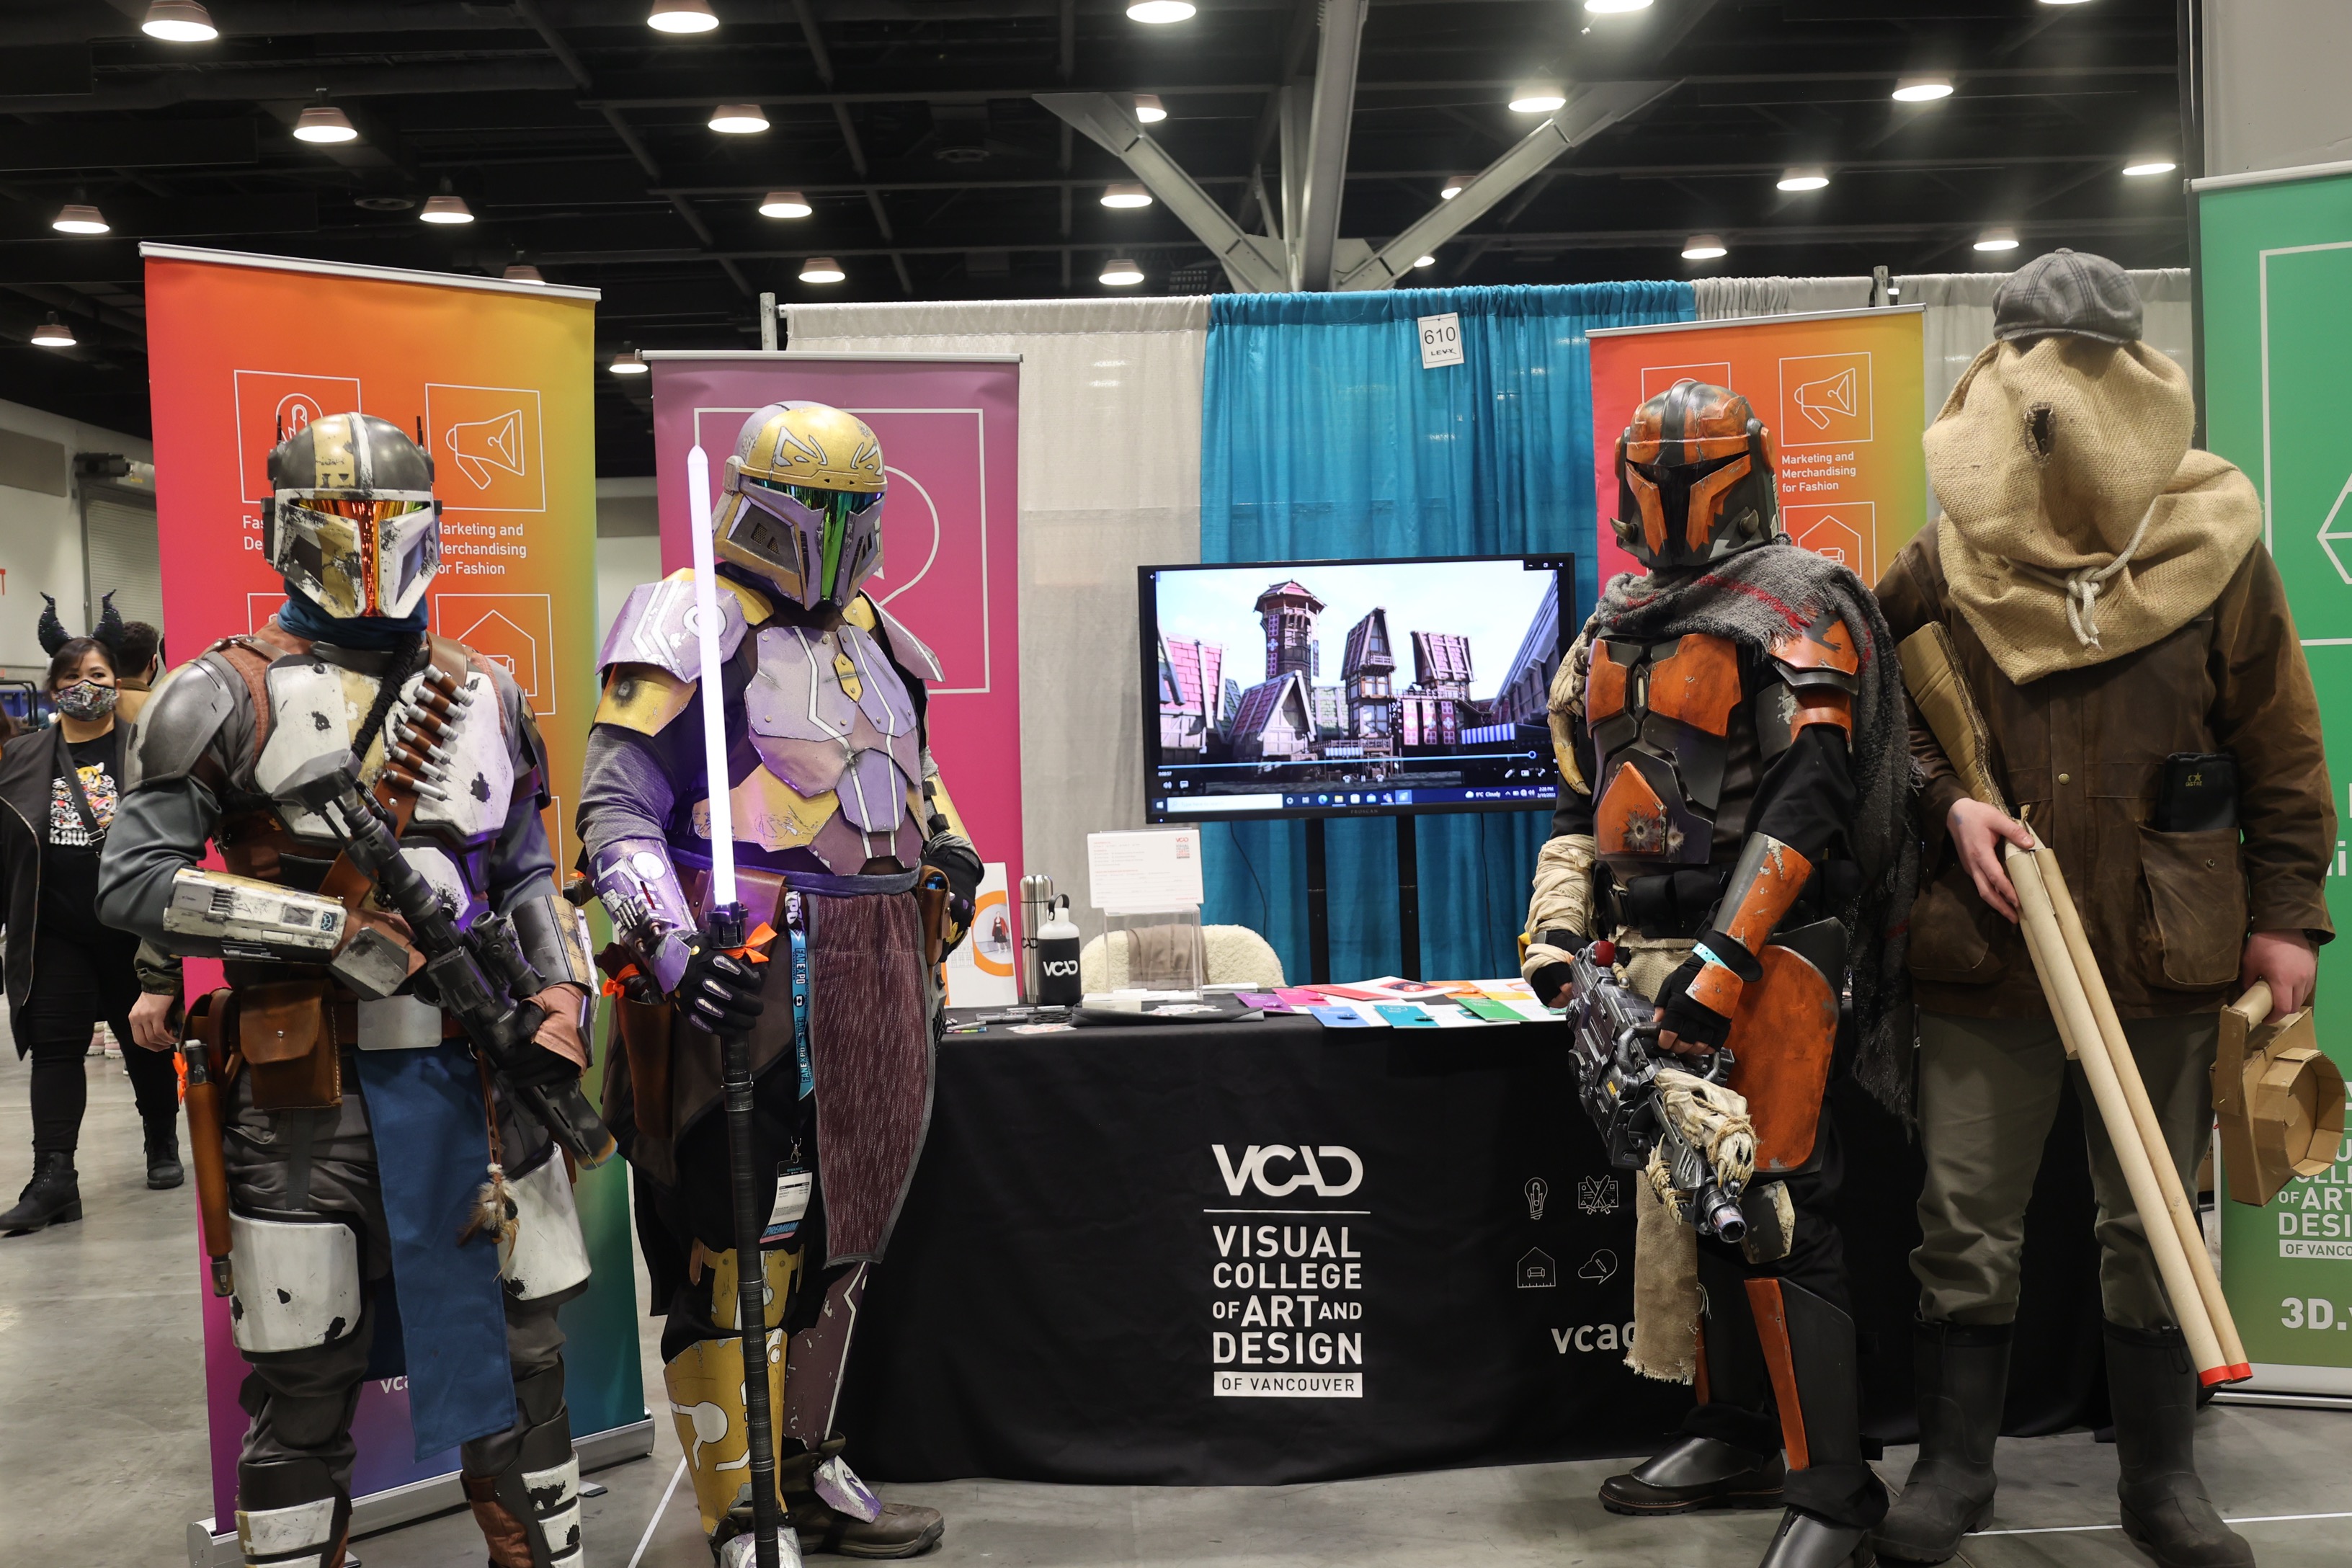 VCAD Attends the Vancouver Fan Expo